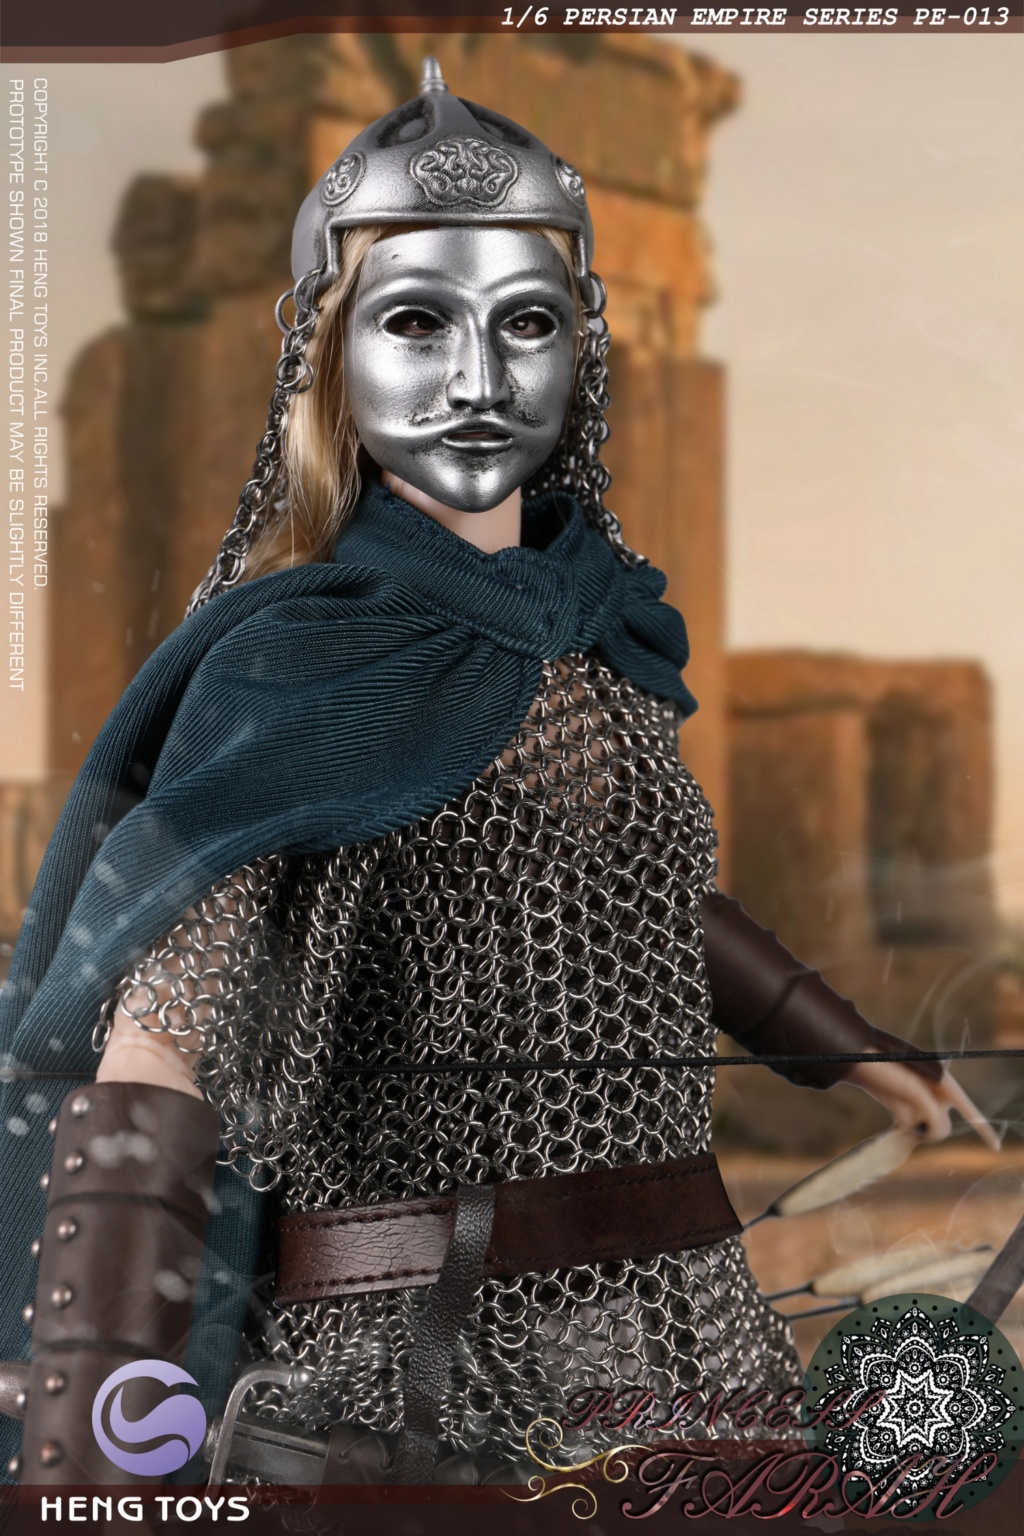 Fantasy - NEW PRODUCT: HENG TOYS: 1/6 Persian Female Archer Standard Edition (PE012) & High Edition (PE013) 10381110